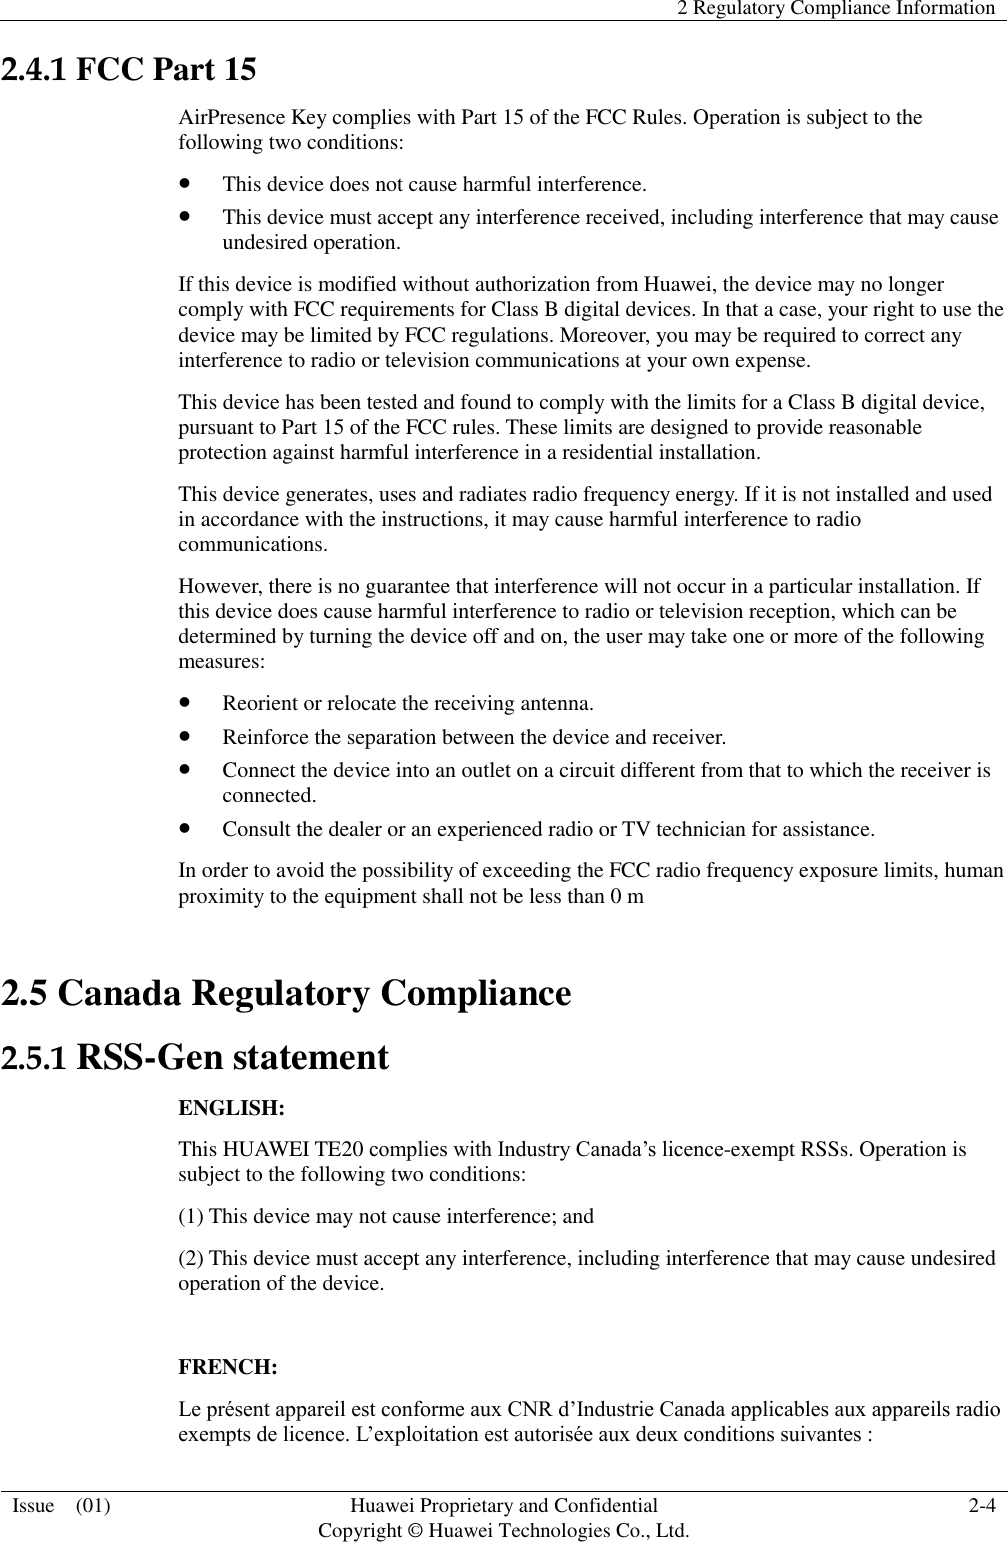   2 Regulatory Compliance Information  Issue    (01) Huawei Proprietary and Confidential                                     Copyright © Huawei Technologies Co., Ltd. 2-4  2.4.1 FCC Part 15 AirPresence Key complies with Part 15 of the FCC Rules. Operation is subject to the following two conditions:  This device does not cause harmful interference.  This device must accept any interference received, including interference that may cause undesired operation. If this device is modified without authorization from Huawei, the device may no longer comply with FCC requirements for Class B digital devices. In that a case, your right to use the device may be limited by FCC regulations. Moreover, you may be required to correct any interference to radio or television communications at your own expense. This device has been tested and found to comply with the limits for a Class B digital device, pursuant to Part 15 of the FCC rules. These limits are designed to provide reasonable protection against harmful interference in a residential installation. This device generates, uses and radiates radio frequency energy. If it is not installed and used in accordance with the instructions, it may cause harmful interference to radio communications. However, there is no guarantee that interference will not occur in a particular installation. If this device does cause harmful interference to radio or television reception, which can be determined by turning the device off and on, the user may take one or more of the following measures:  Reorient or relocate the receiving antenna.  Reinforce the separation between the device and receiver.  Connect the device into an outlet on a circuit different from that to which the receiver is connected.  Consult the dealer or an experienced radio or TV technician for assistance. In order to avoid the possibility of exceeding the FCC radio frequency exposure limits, human proximity to the equipment shall not be less than 0 m 2.5 Canada Regulatory Compliance 2.5.1 RSS-Gen statement ENGLISH: This HUAWEI TE20 complies with Industry Canada’s licence-exempt RSSs. Operation is subject to the following two conditions: (1) This device may not cause interference; and (2) This device must accept any interference, including interference that may cause undesired operation of the device.  FRENCH: Le présent appareil est conforme aux CNR d’Industrie Canada applicables aux appareils radio exempts de licence. L’exploitation est autorisée aux deux conditions suivantes : 